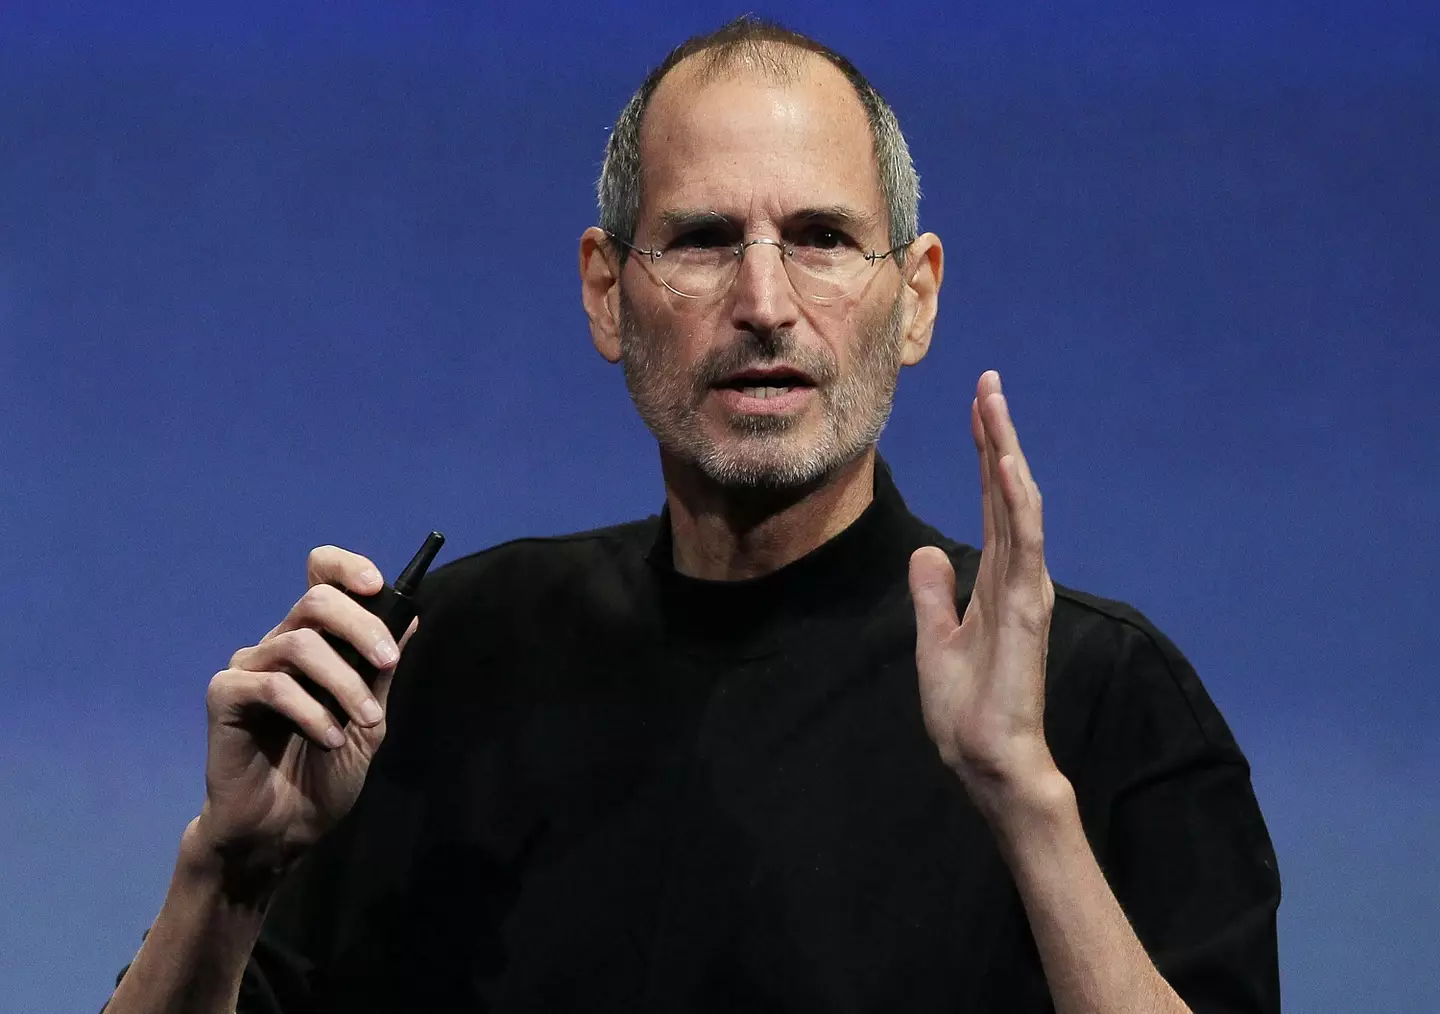 Steve Jobs wanted to 'break' the trend.